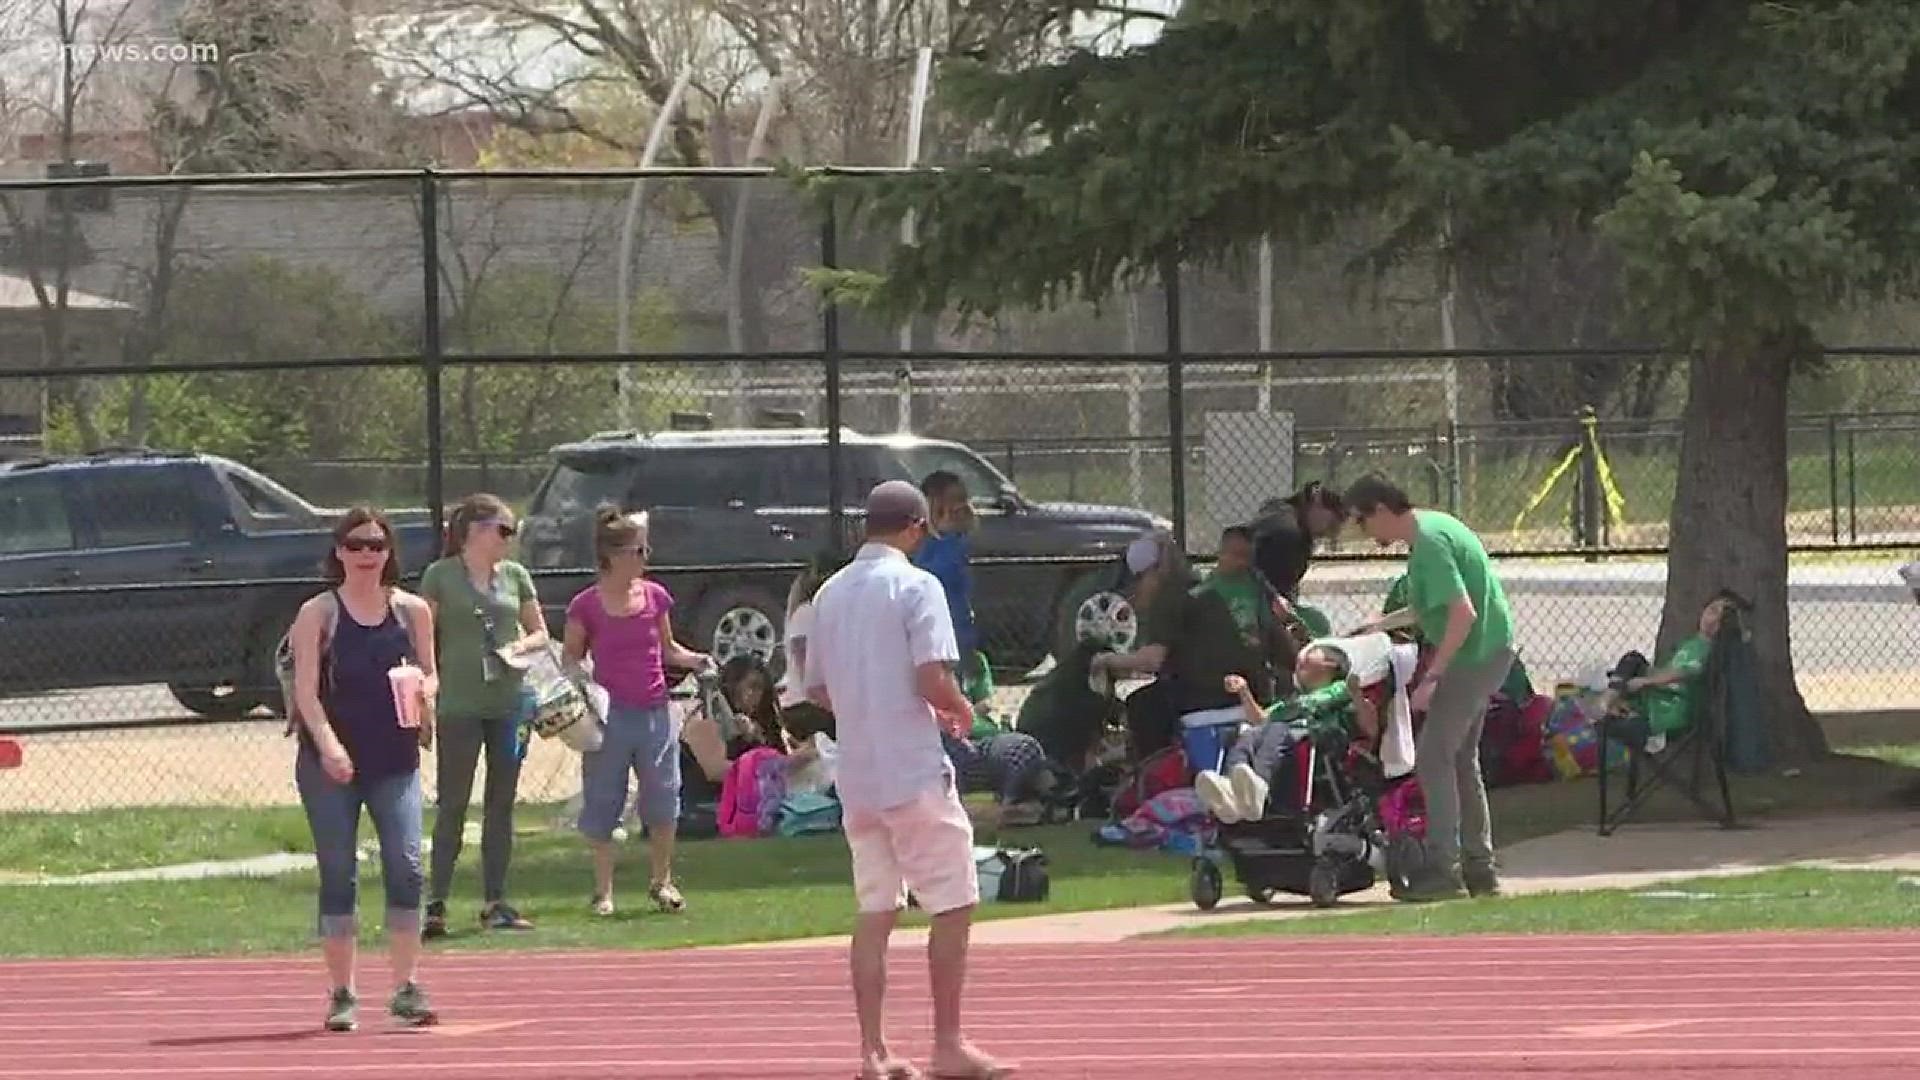 Denver Public Schools worked with Special Olympics Colorado to put on a Unified Track and Field Meet for elementary school students. The idea is to bring together kids of all abilities and disabilities.